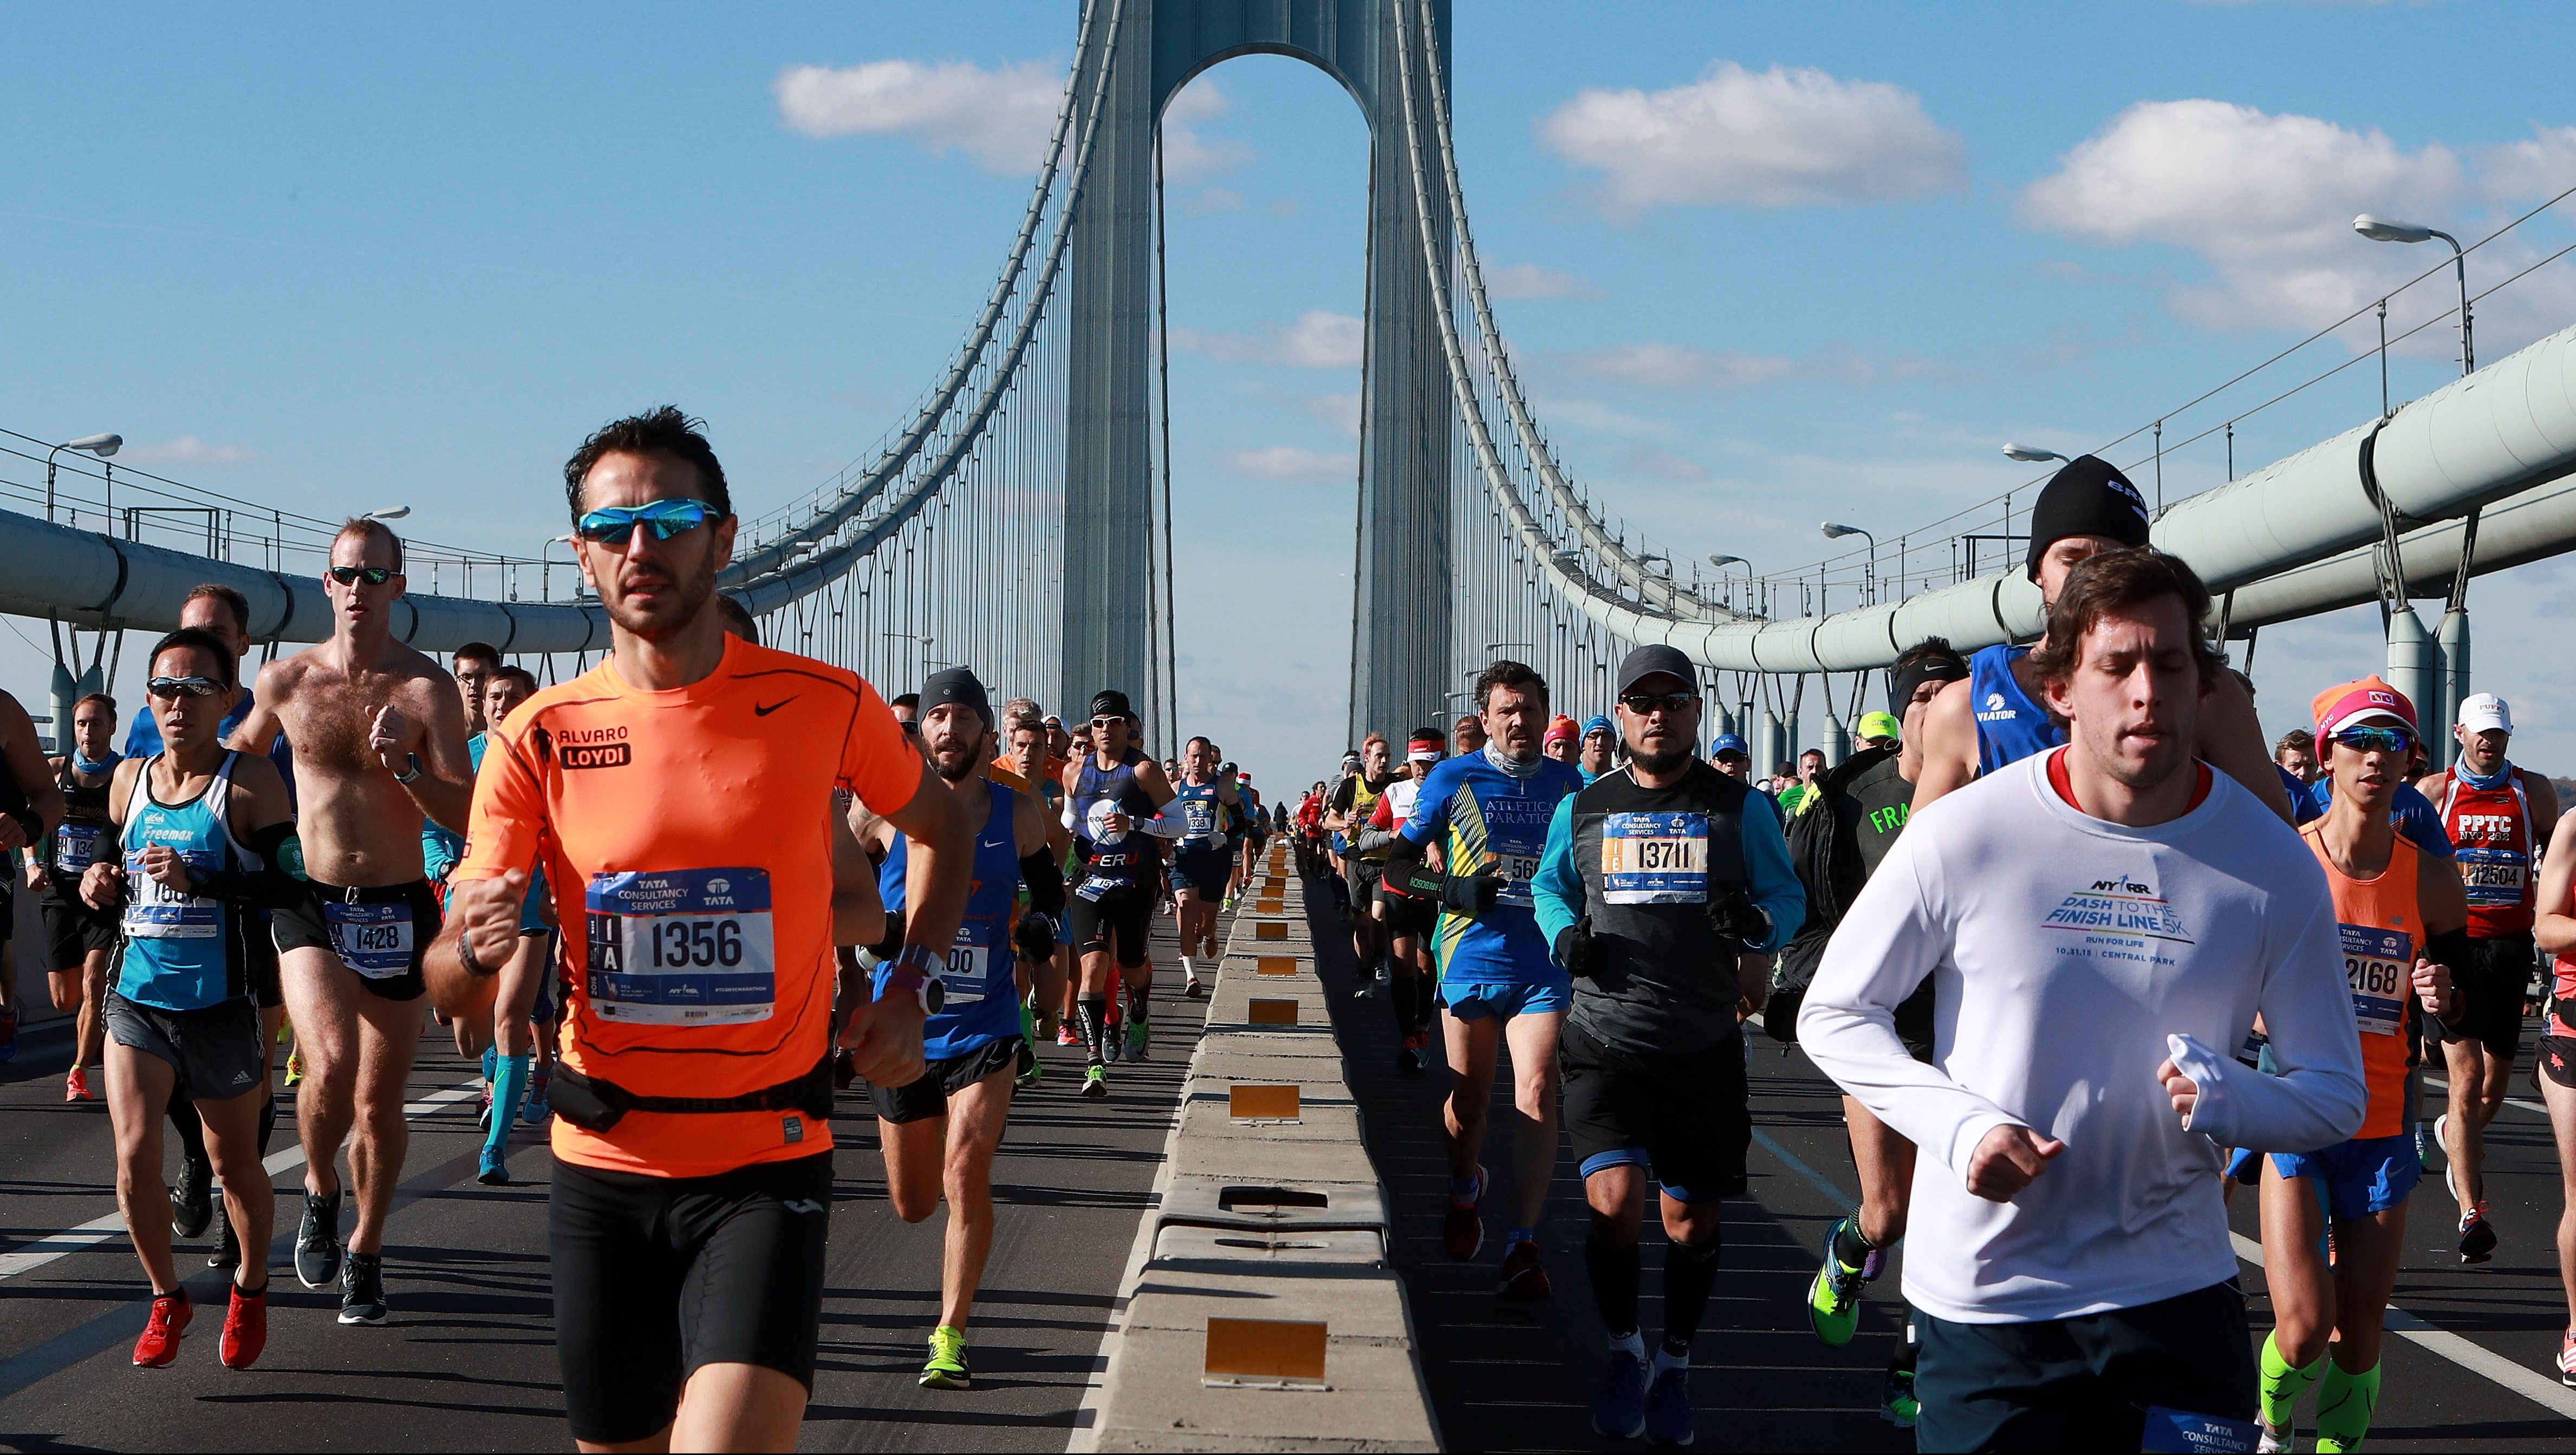 NYC Marathon 2016 Photos The Pictures You Need to See